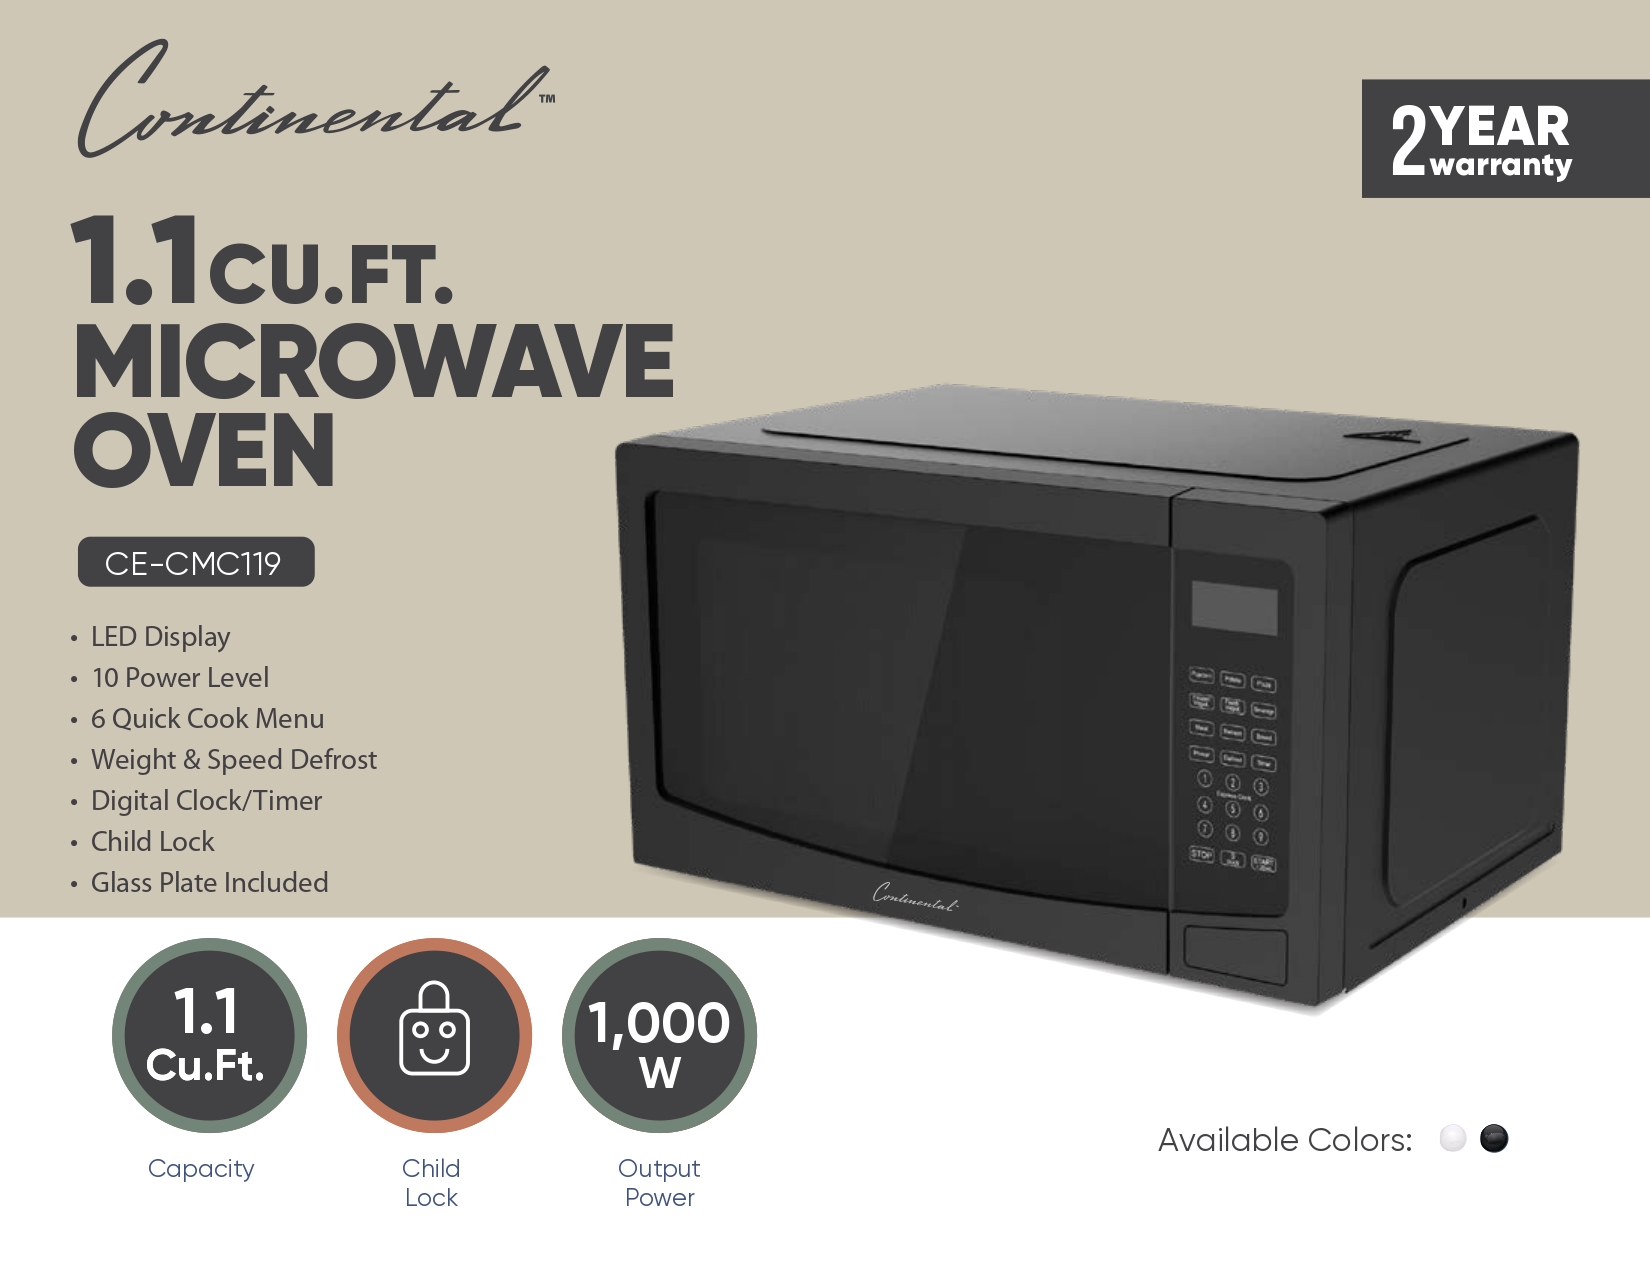 1.1CU.FT MICROWAVE OVEN